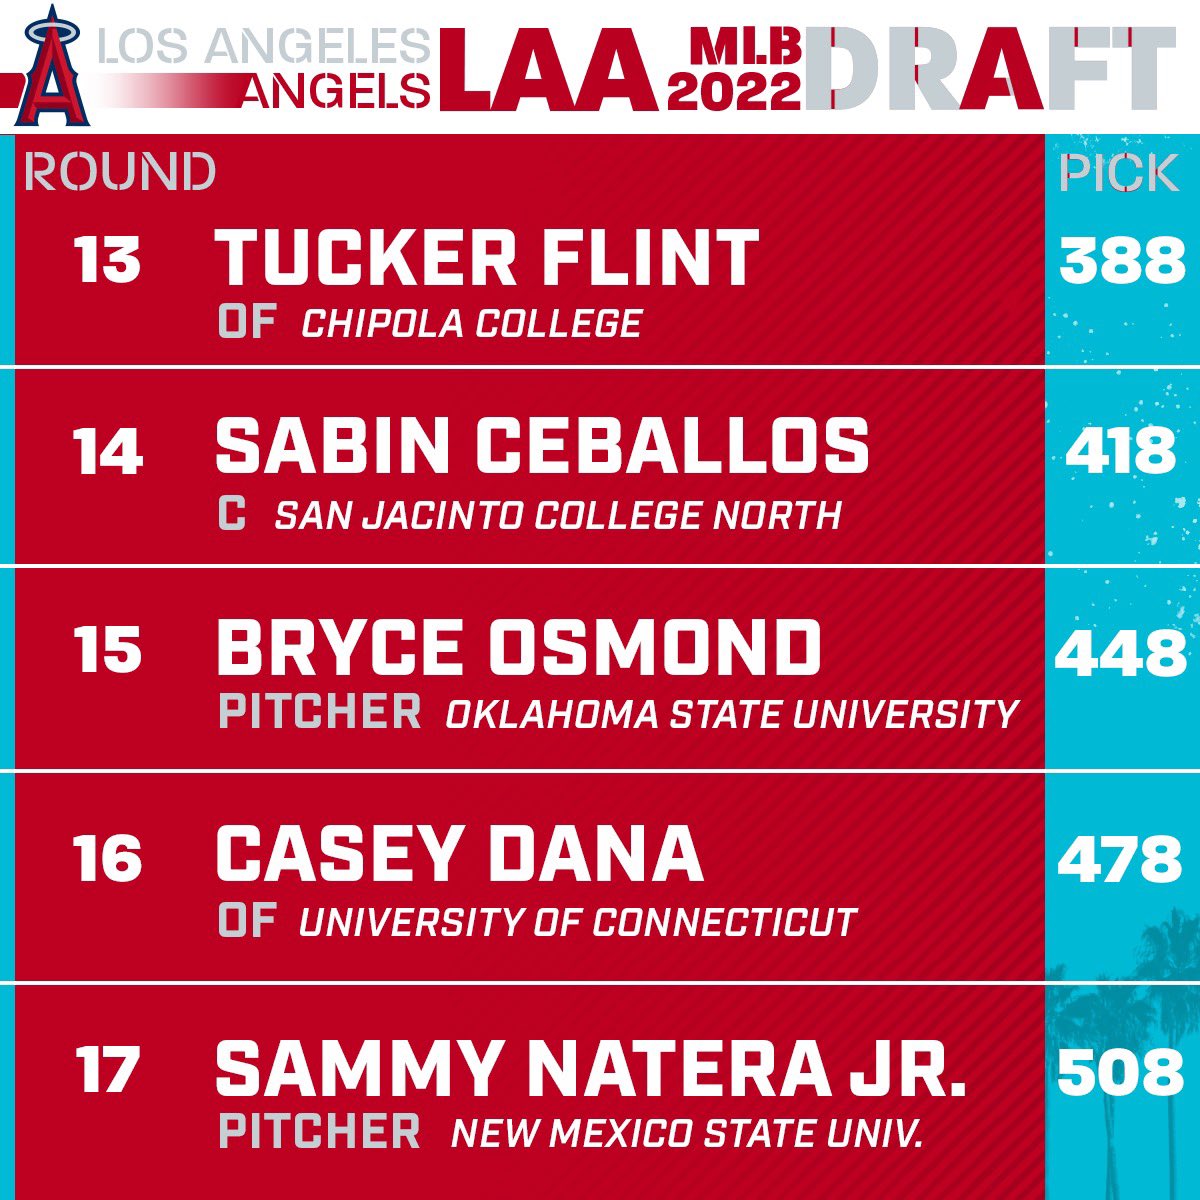 Los Angeles Angels on Twitter to the Angels! 😇 Our picks are